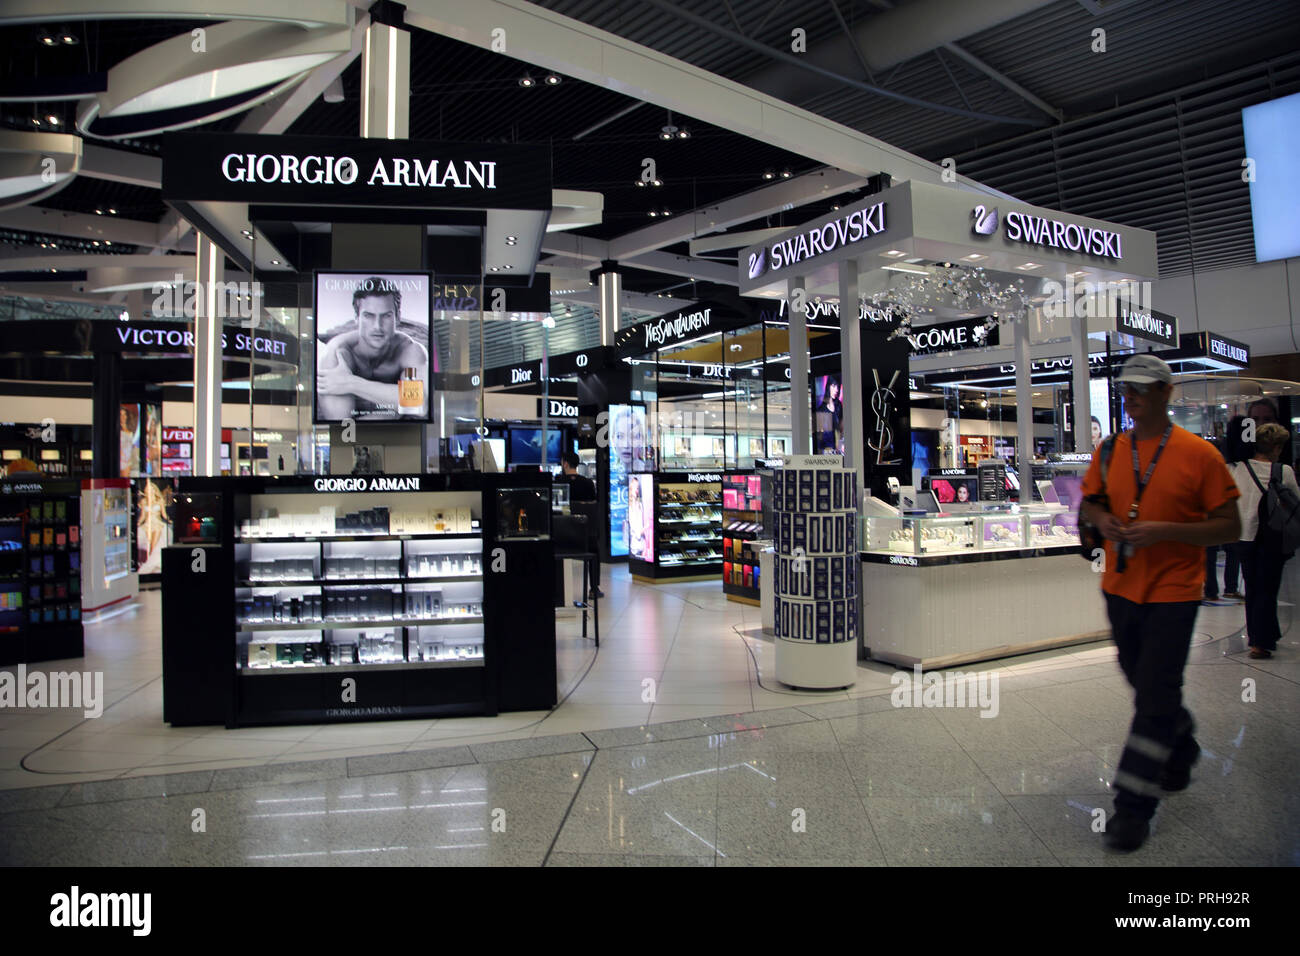 Athens Greece Athens Airport Duty Free Fragrance Counters and Swarovski Jewellery Stock Photo